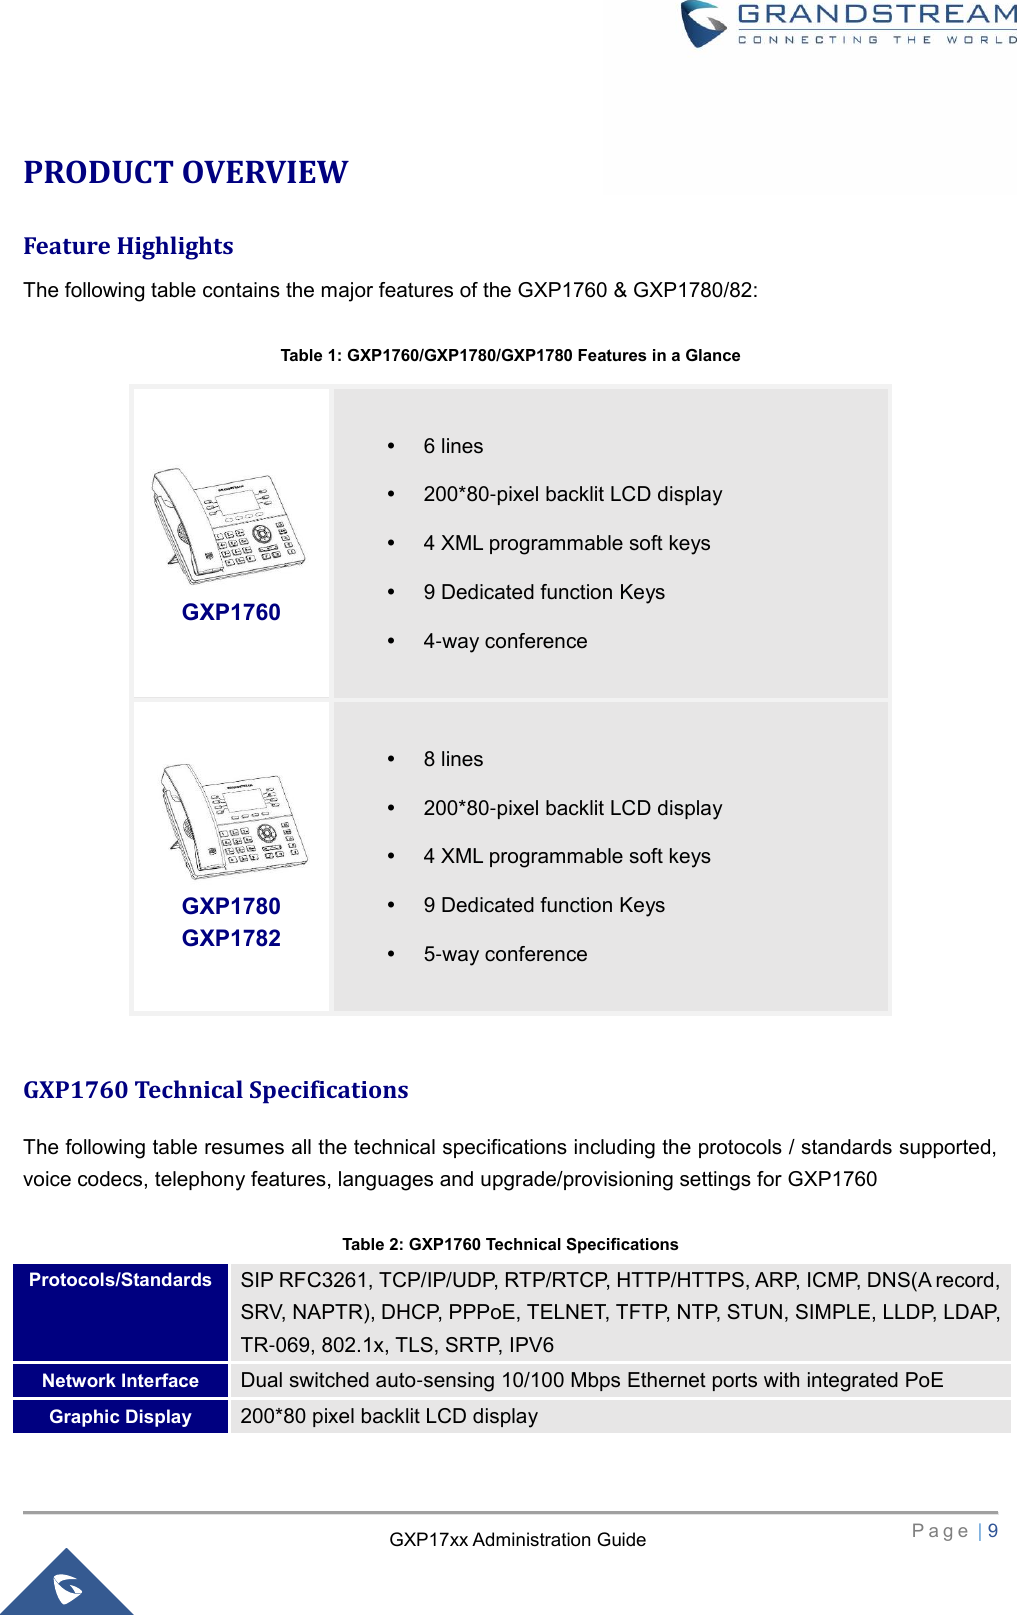   P a g e  | 9       GXP17xx Administration Guide PRODUCT OVERVIEW Feature Highlights The following table contains the major features of the GXP1760 &amp; GXP1780/82:  Table 1: GXP1760/GXP1780/GXP1780 Features in a Glance GXP1760   6 lines  200*80-pixel backlit LCD display  4 XML programmable soft keys  9 Dedicated function Keys    4-way conference  GXP1780  GXP1782   8 lines  200*80-pixel backlit LCD display  4 XML programmable soft keys  9 Dedicated function Keys    5-way conference   GXP1760 Technical Specifications The following table resumes all the technical specifications including the protocols / standards supported, voice codecs, telephony features, languages and upgrade/provisioning settings for GXP1760  Table 2: GXP1760 Technical Specifications Protocols/Standards SIP RFC3261, TCP/IP/UDP, RTP/RTCP, HTTP/HTTPS, ARP, ICMP, DNS(A record, SRV, NAPTR), DHCP, PPPoE, TELNET, TFTP, NTP, STUN, SIMPLE, LLDP, LDAP, TR-069, 802.1x, TLS, SRTP, IPV6 Network Interface Dual switched auto-sensing 10/100 Mbps Ethernet ports with integrated PoE Graphic Display 200*80 pixel backlit LCD display 